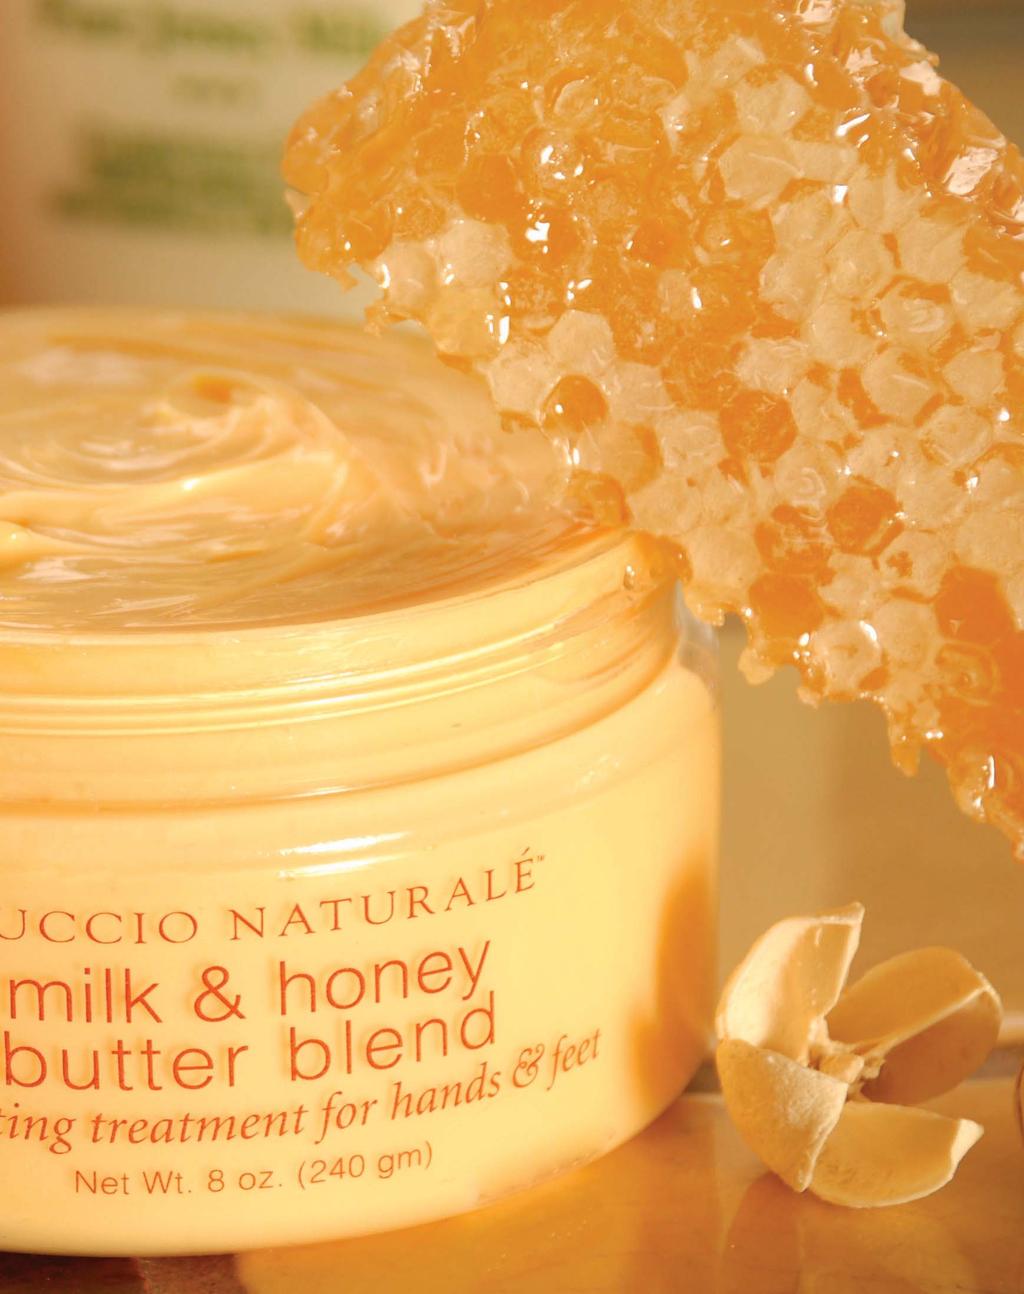 Butter Blend 10x the Moisturizing Power of Lotions A non-oily, intense hydrating treatment for silky smooth skin.